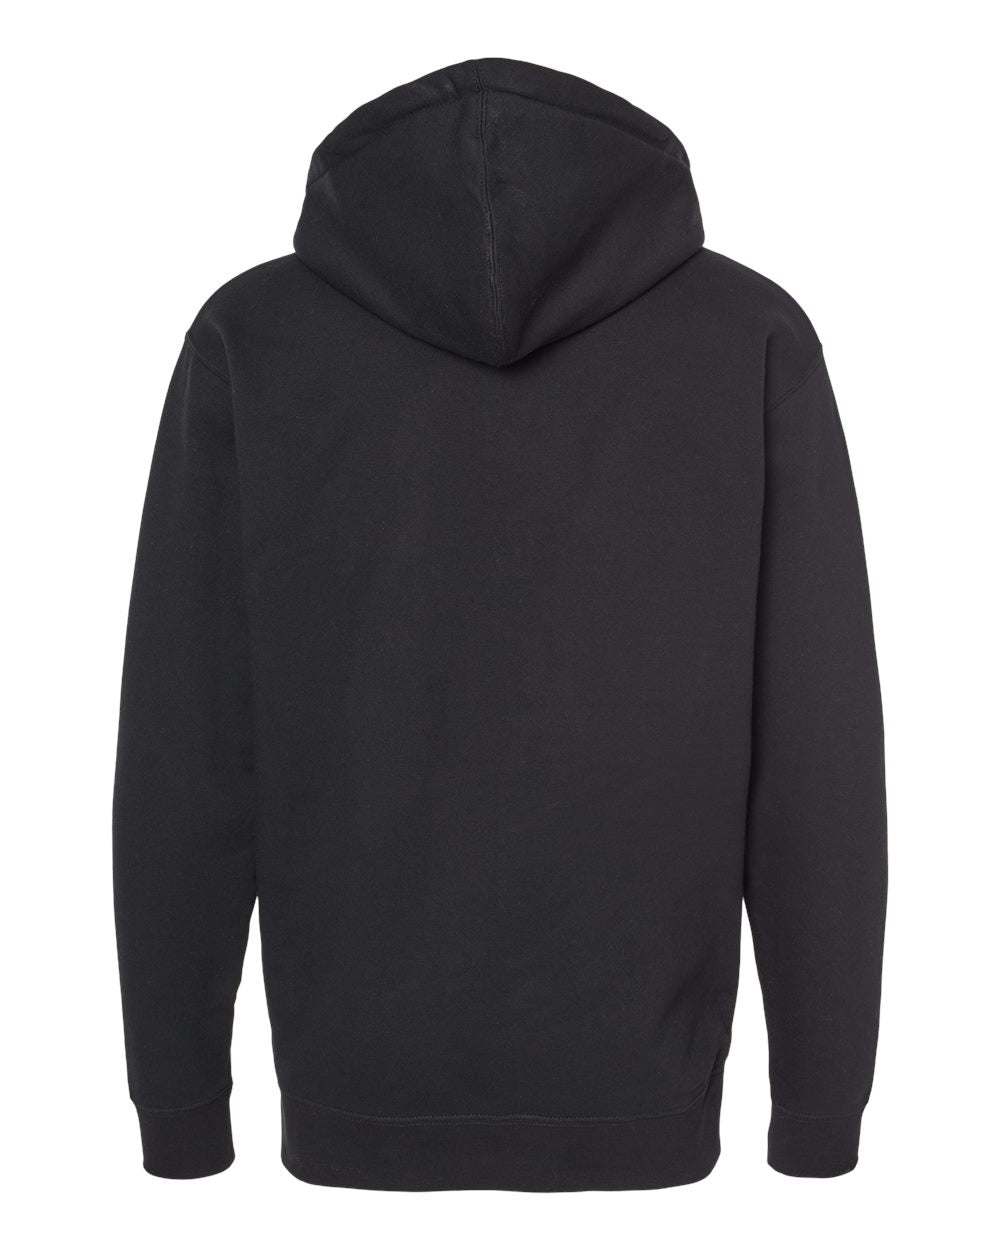 HEAVYWEIGHT - Independent Trading Co. -  Full-Zip Hooded Sweatshirt - IND4000Z